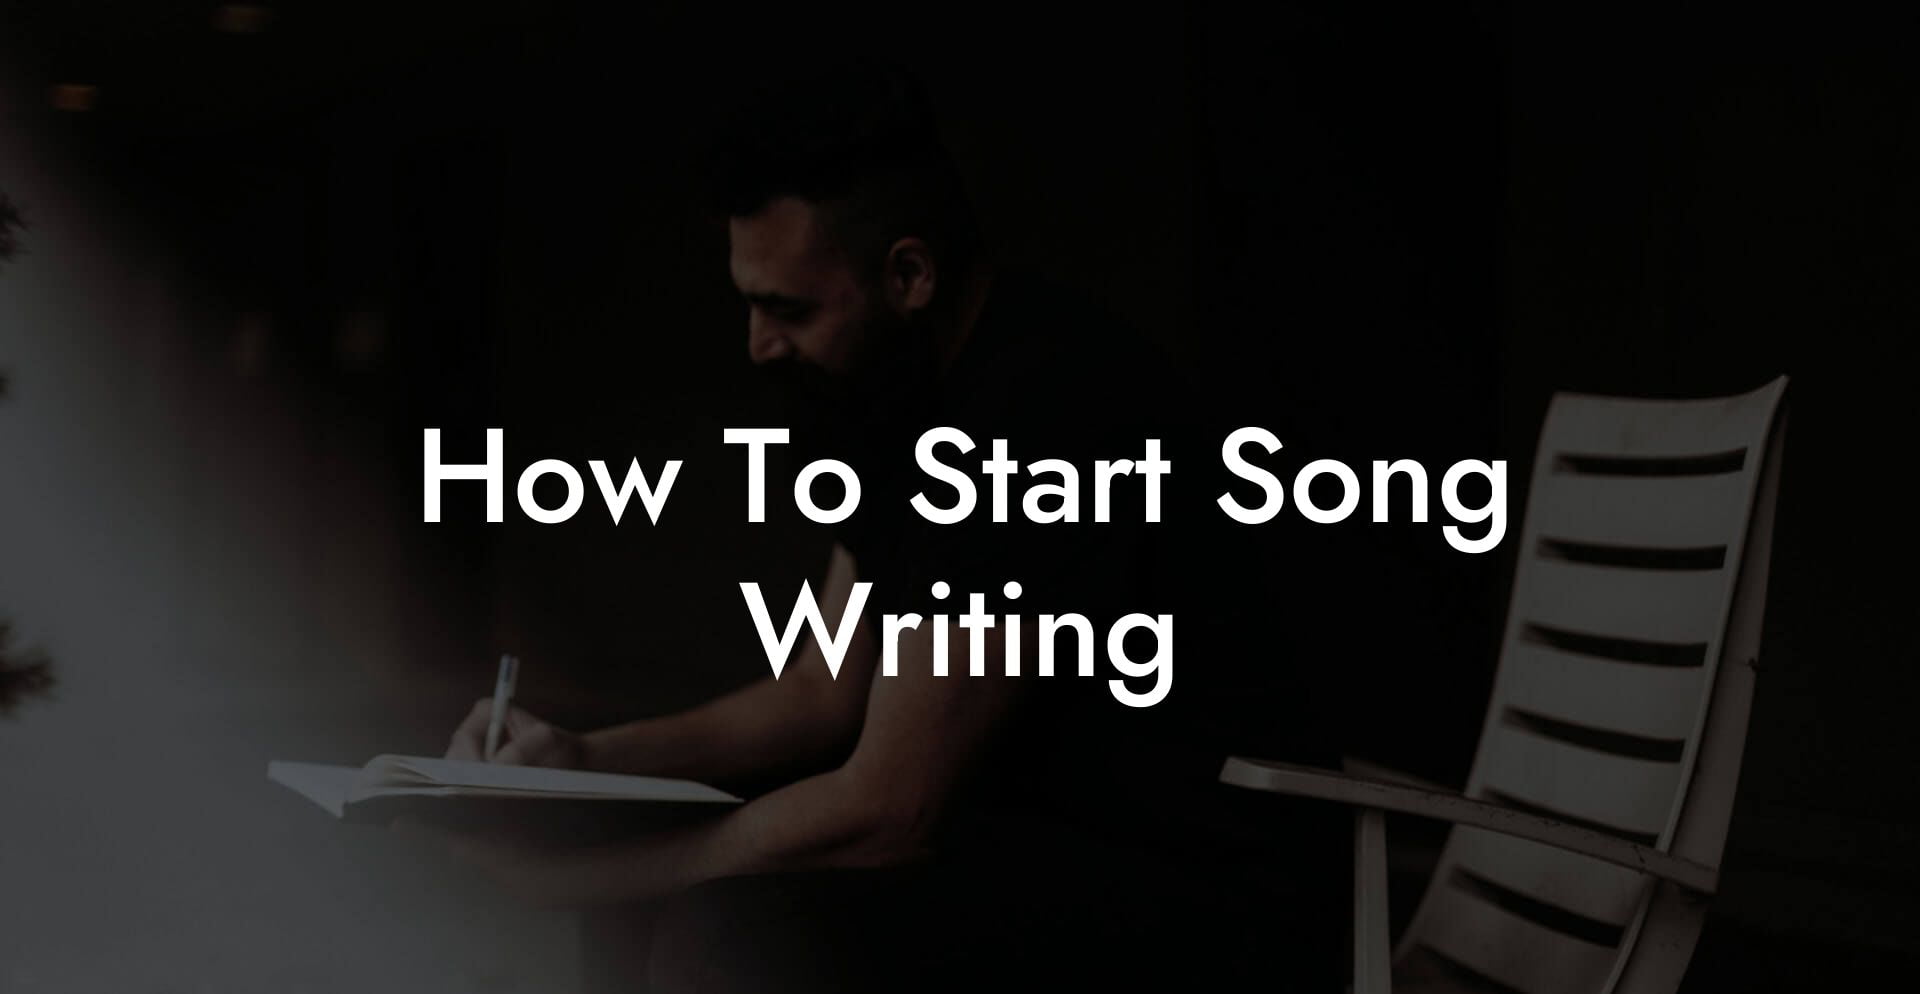 how to start song writing lyric assistant